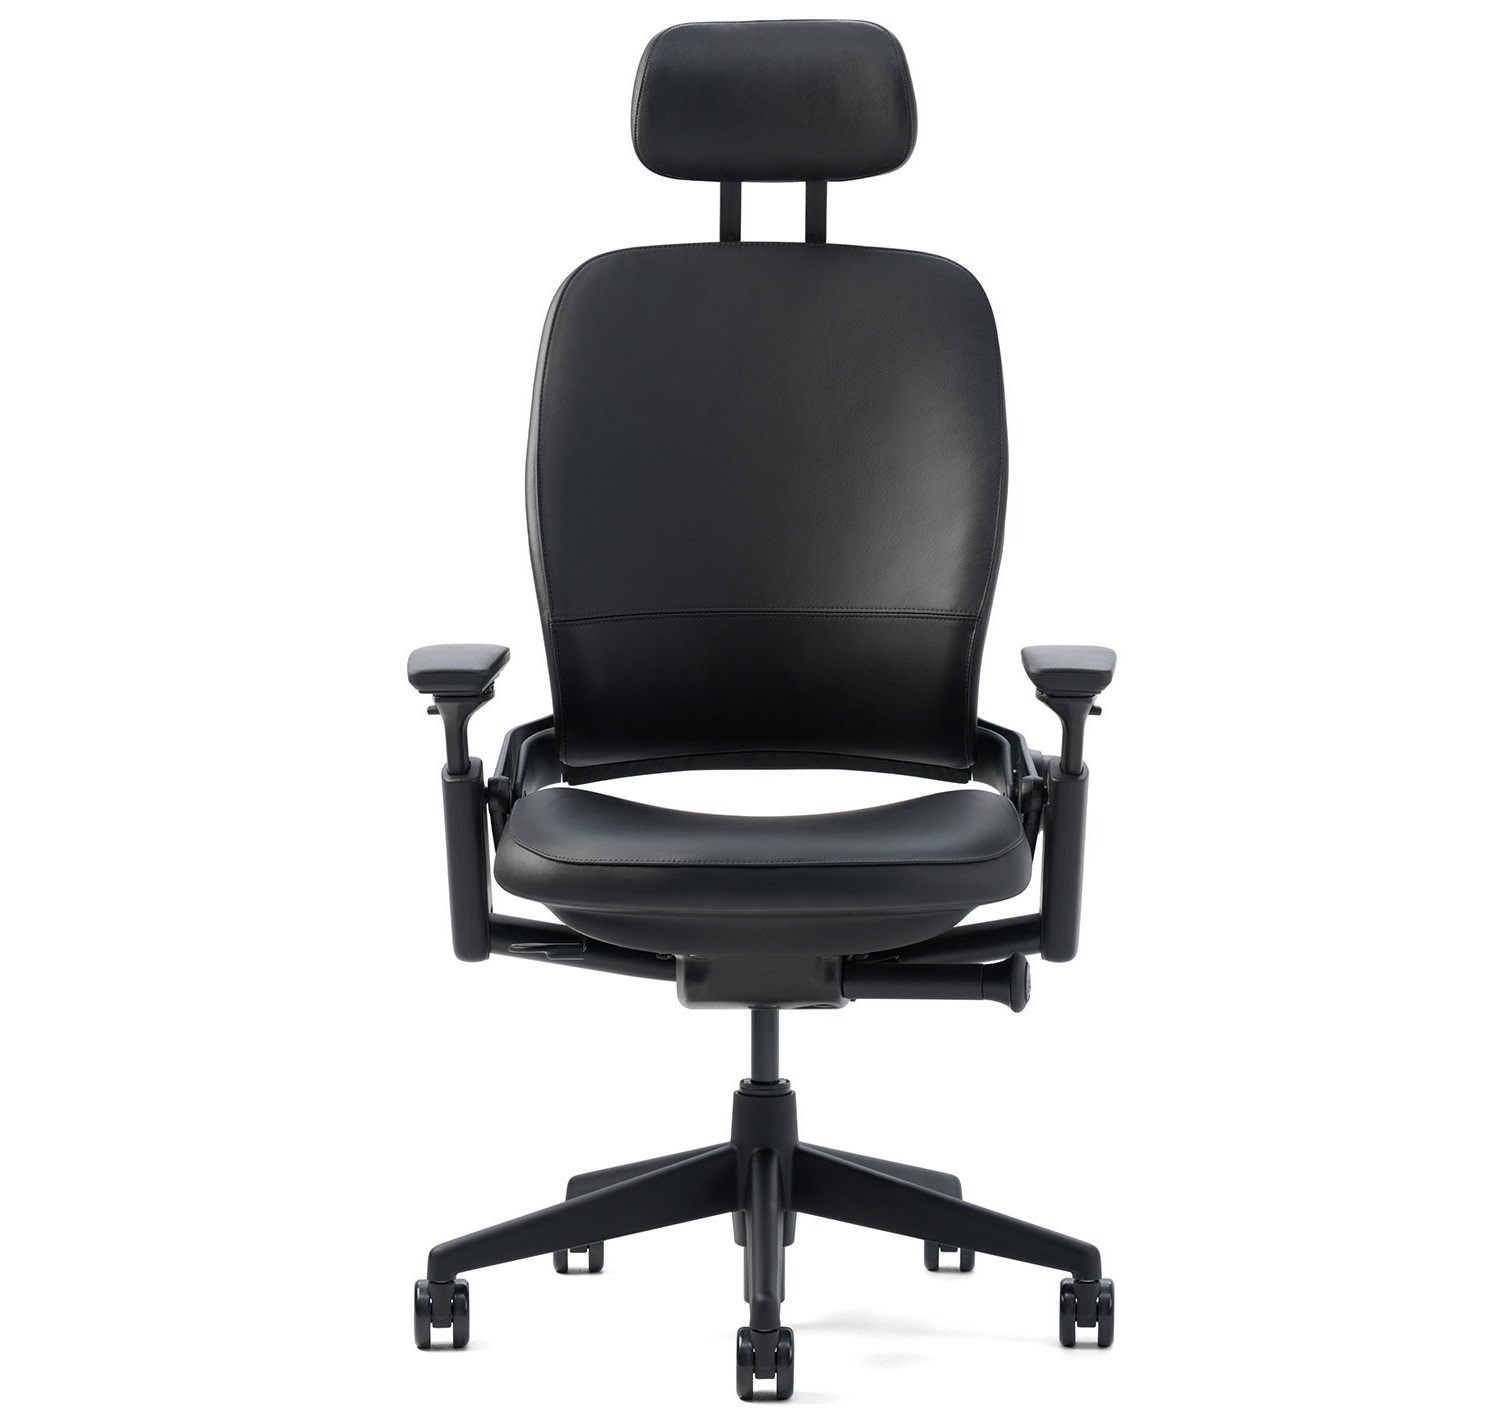 Steelcase Leap Desk Chair With Headrest In Buzz2 